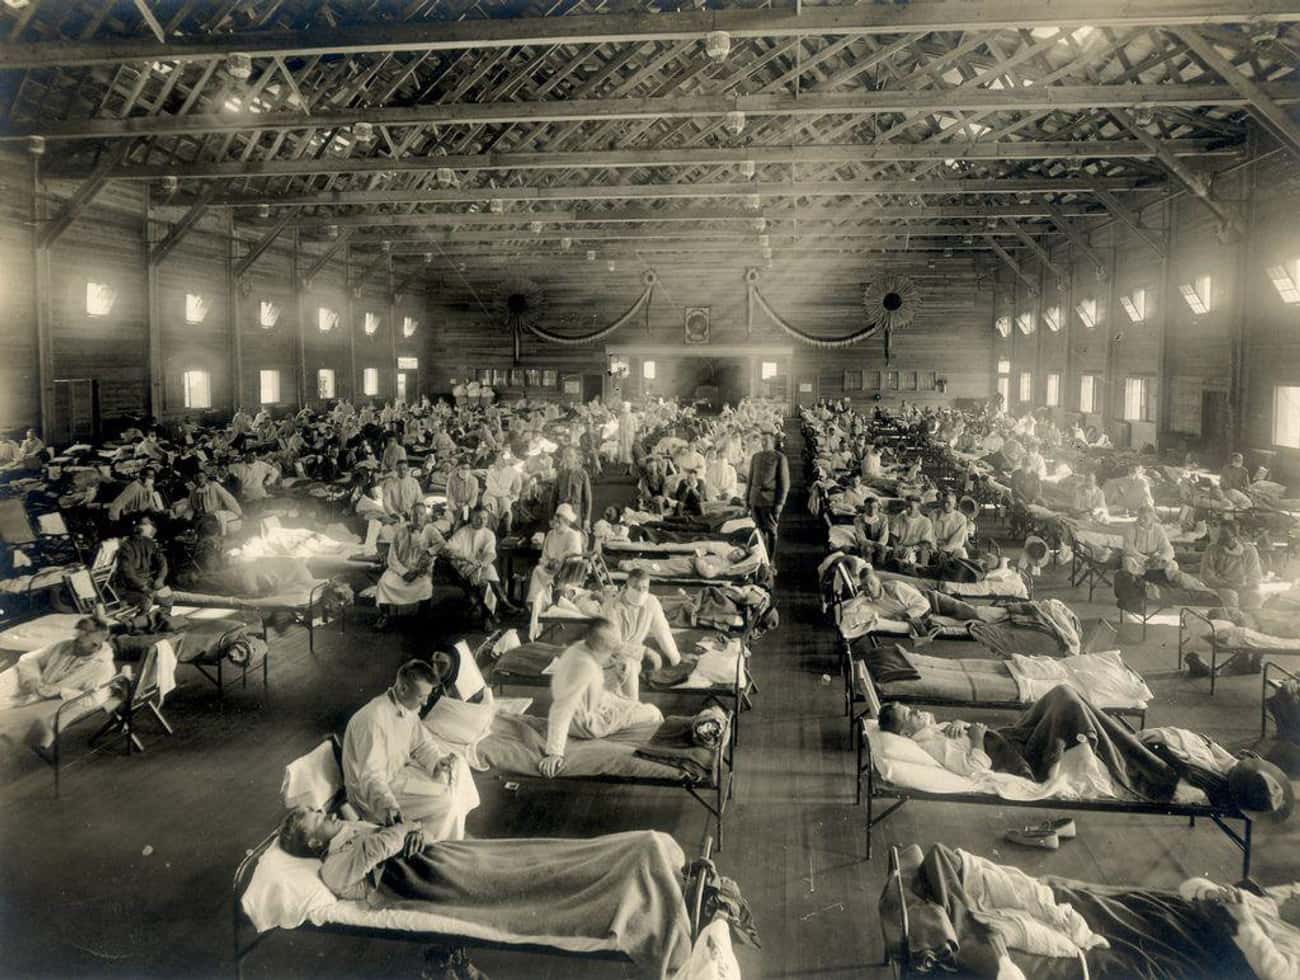 After The Great War And A 1918 Flu Pandemic, Cultural Obsession With The Afterlife Skyrocketed